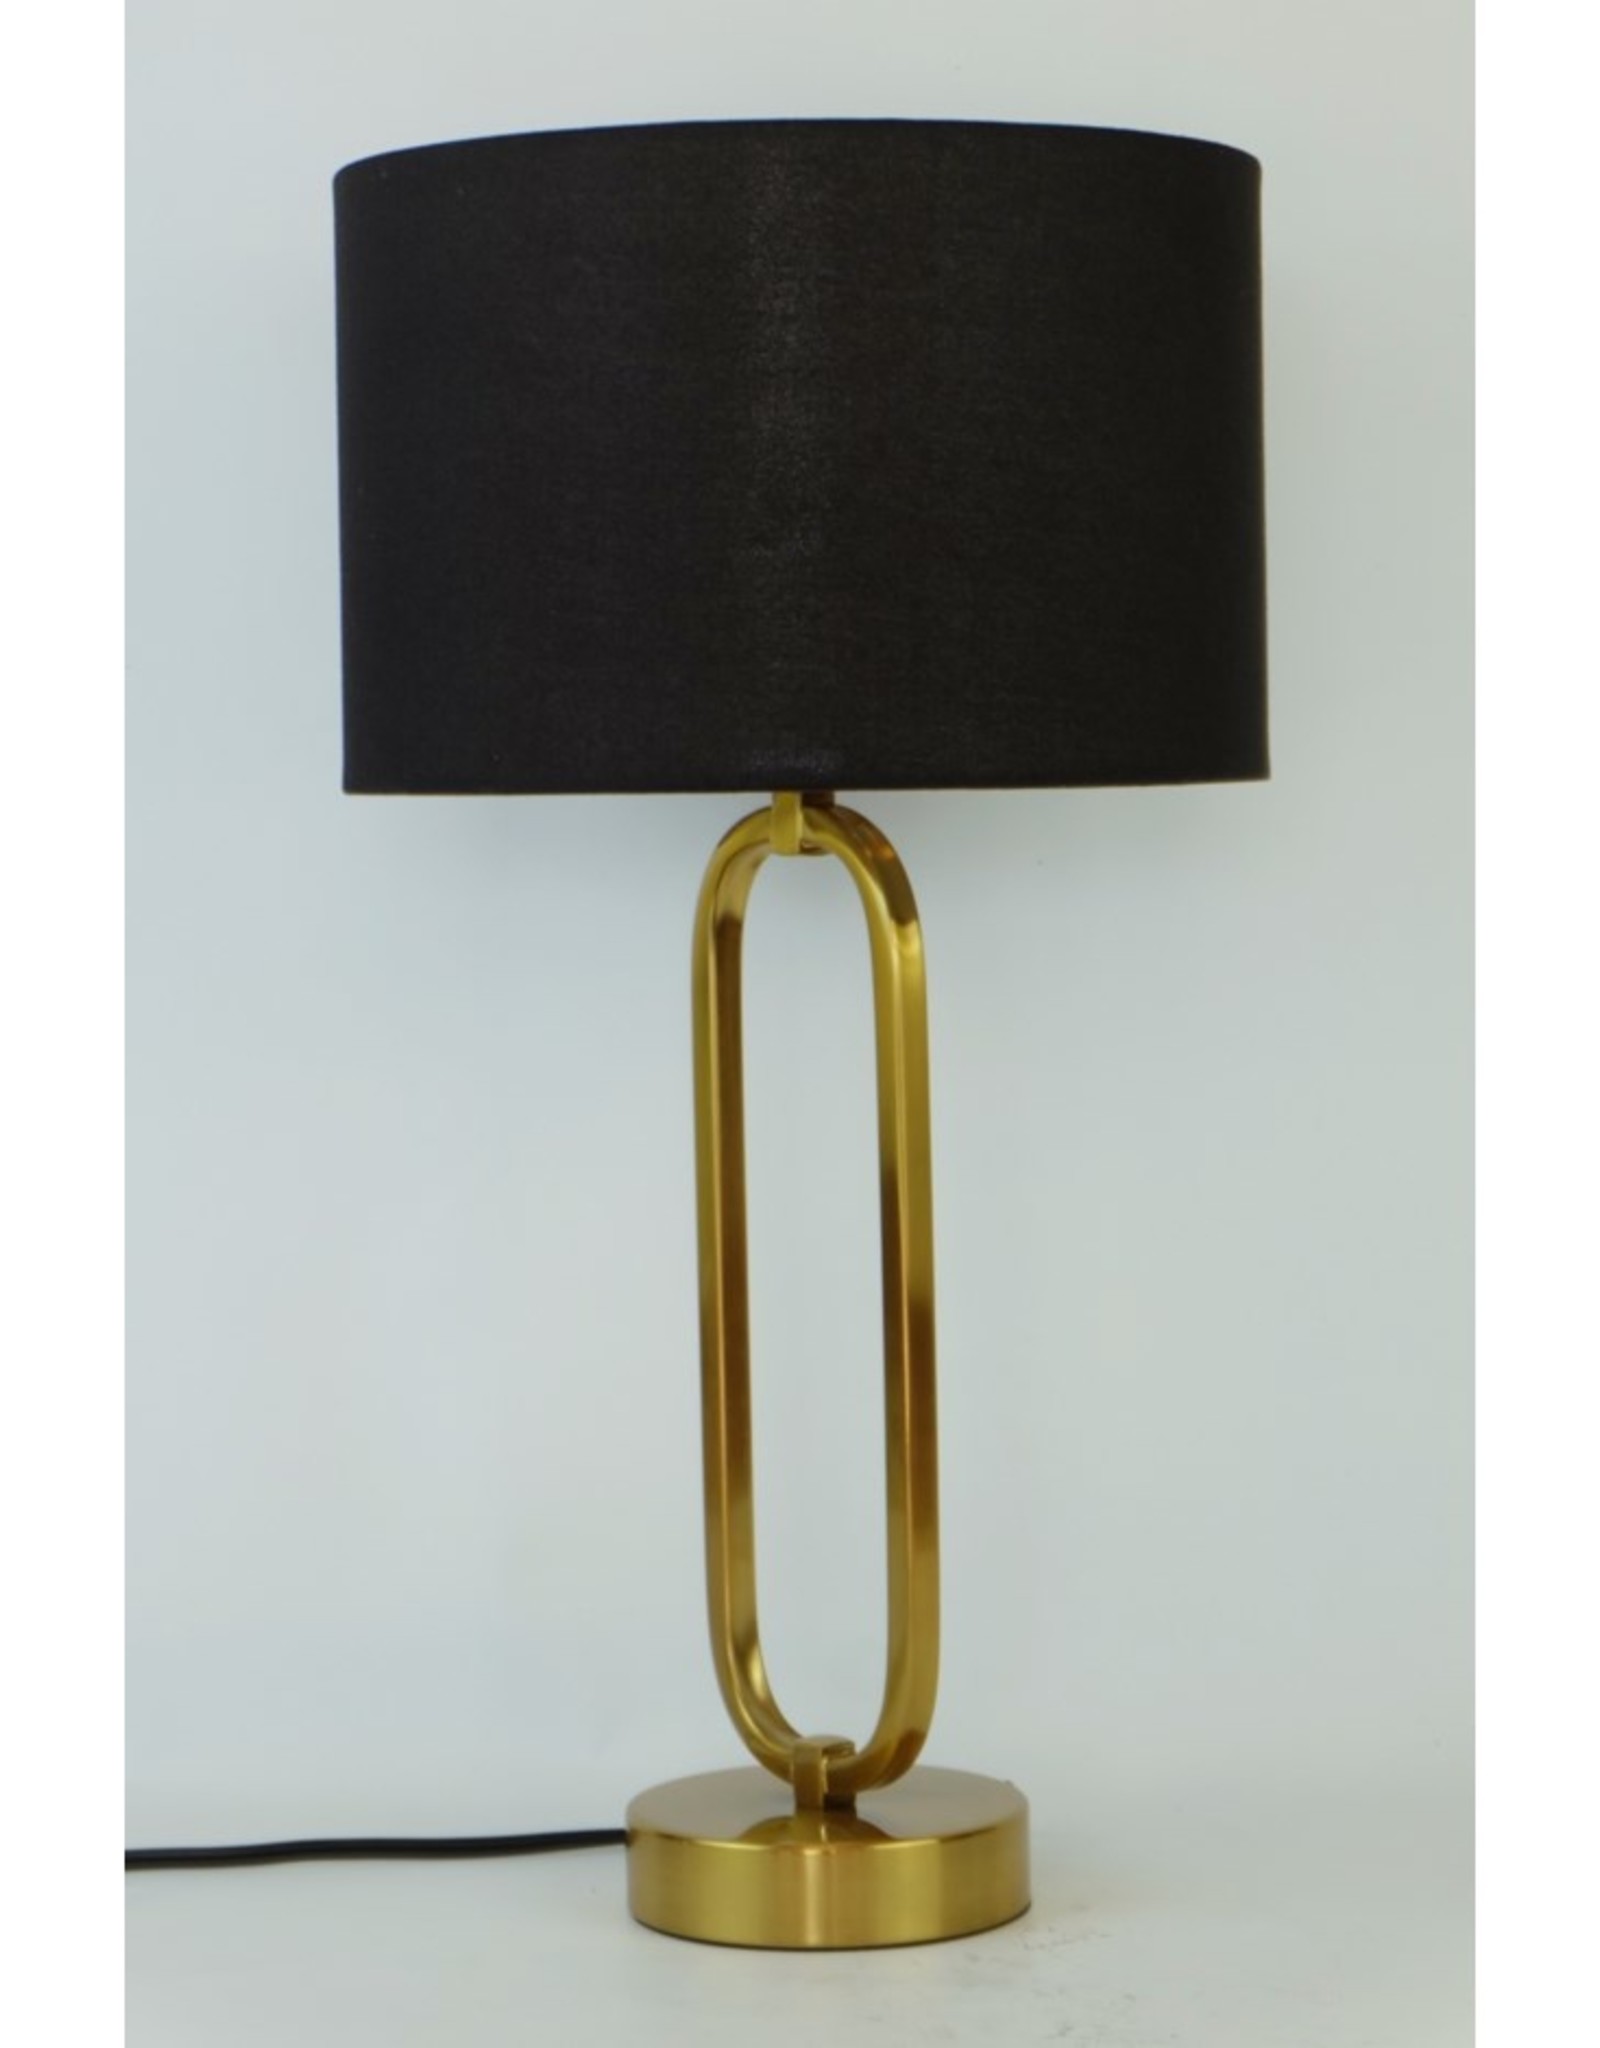 Lamp CJ Oval Ring in Gold Metal Table L. with Black Shade  LM397600